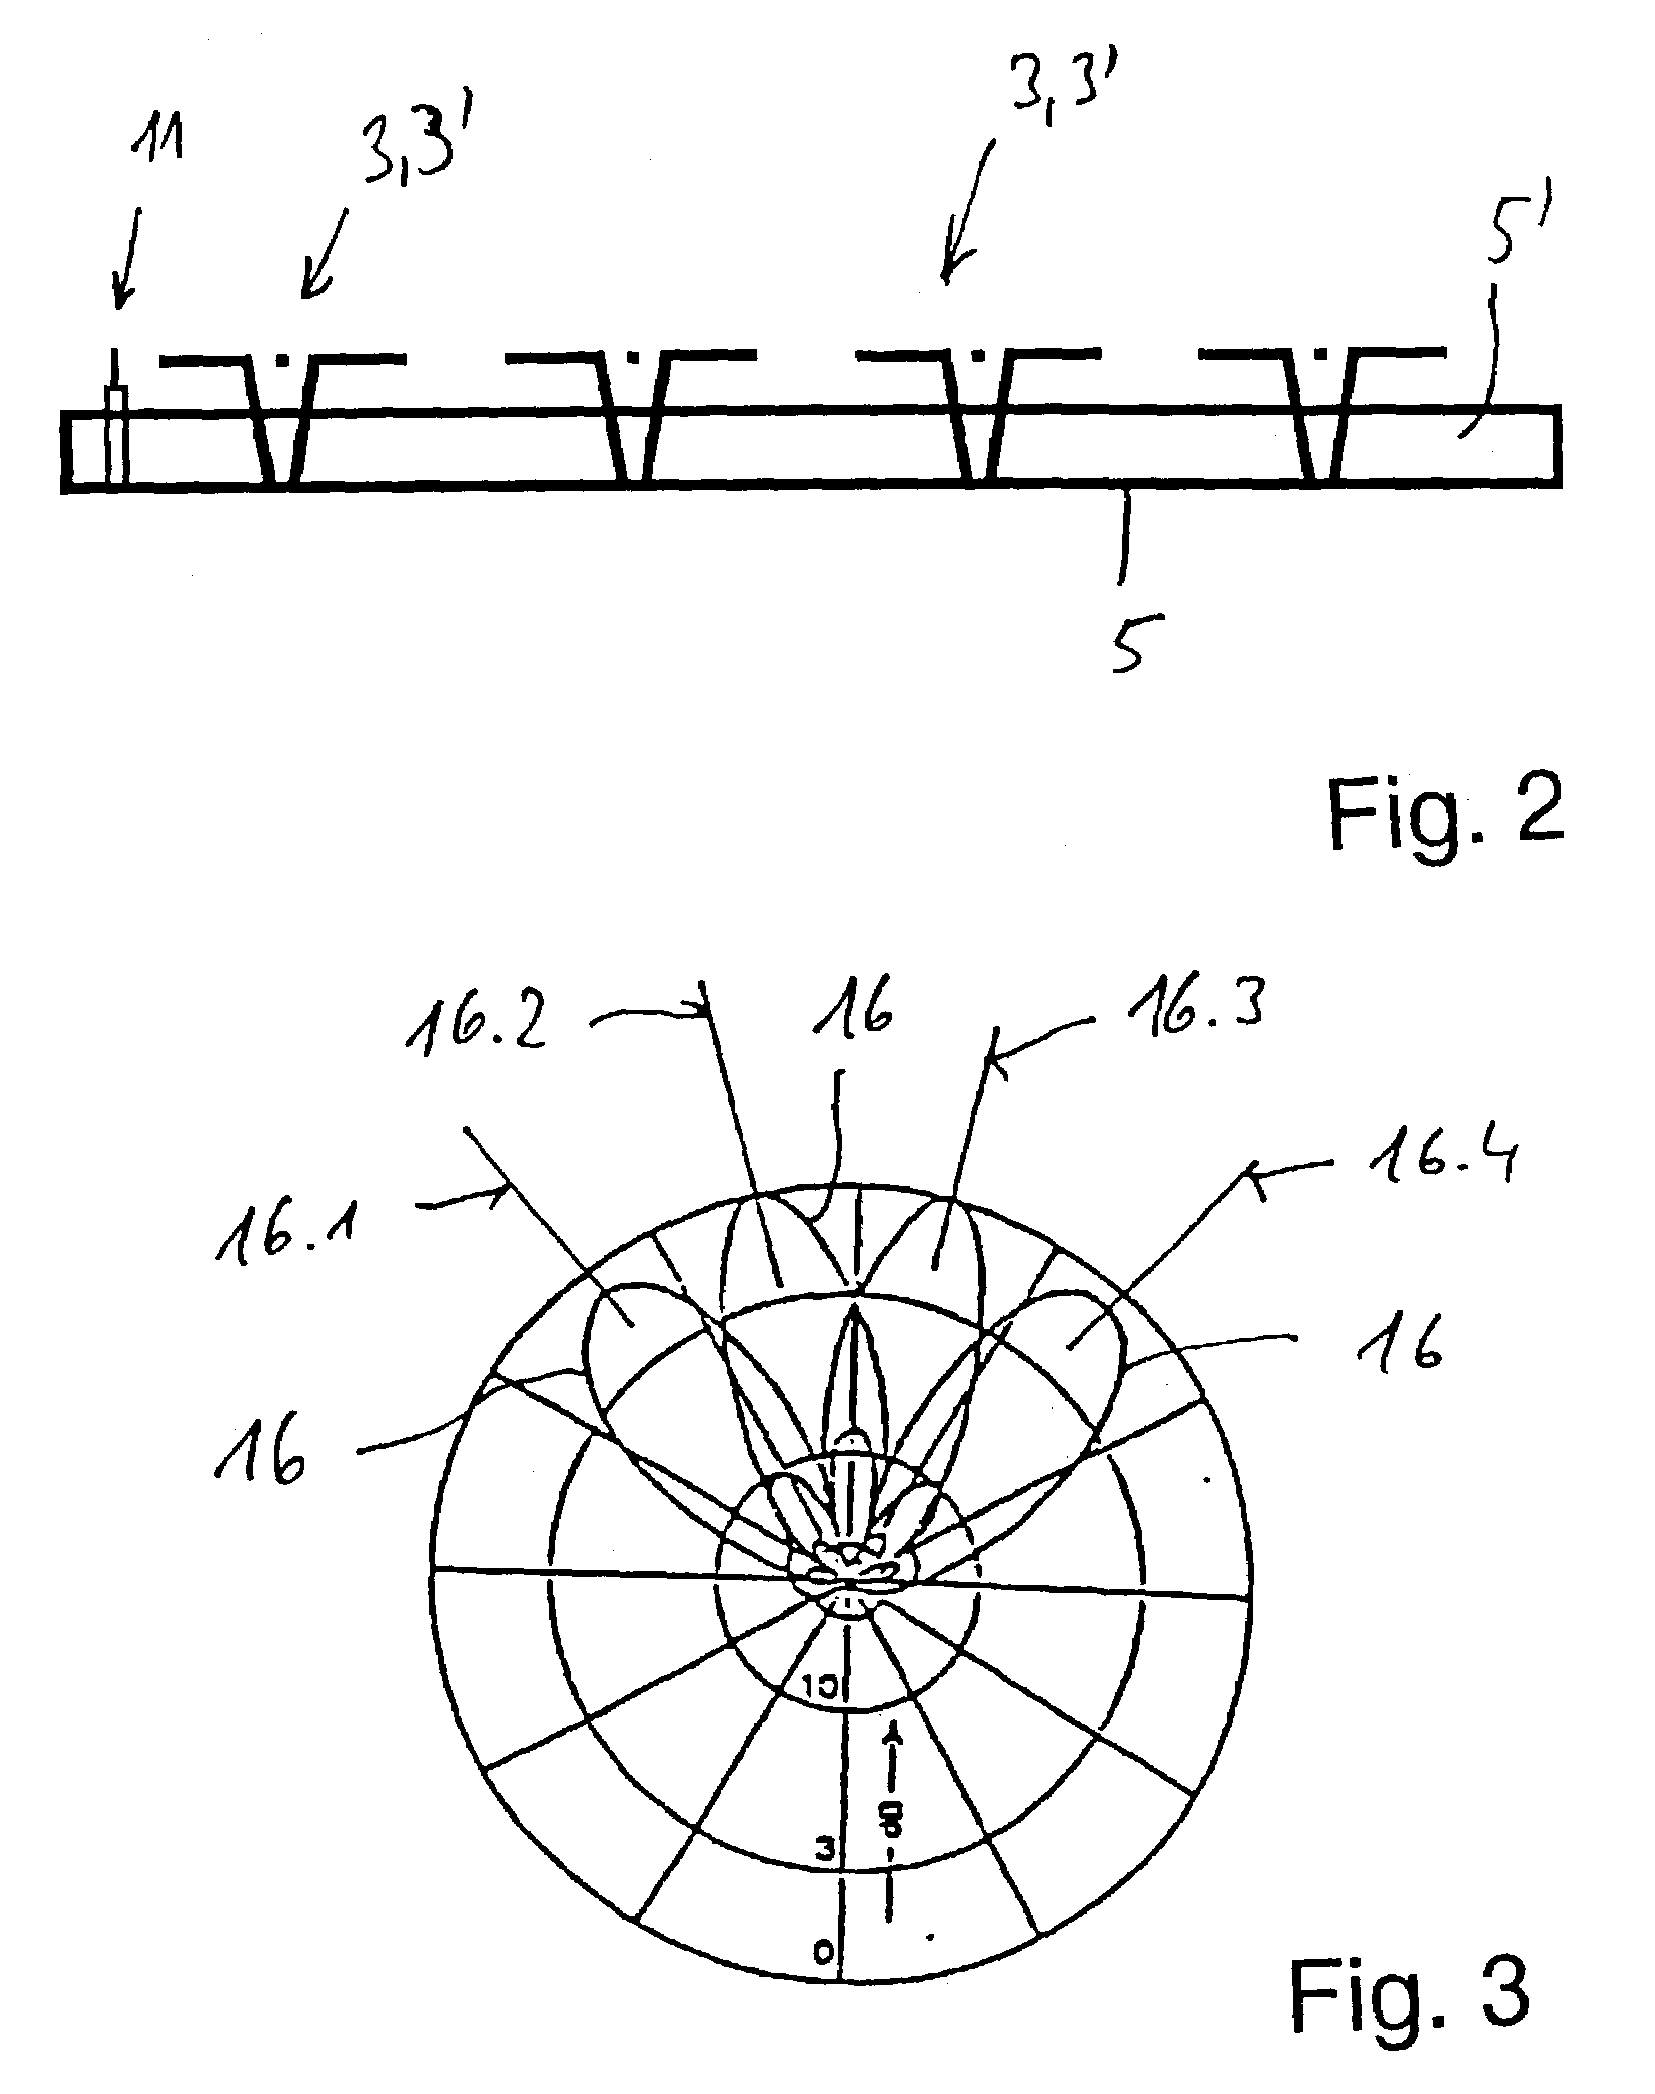 Calibration apparatus for a switchable antenna array, and an associated operating method